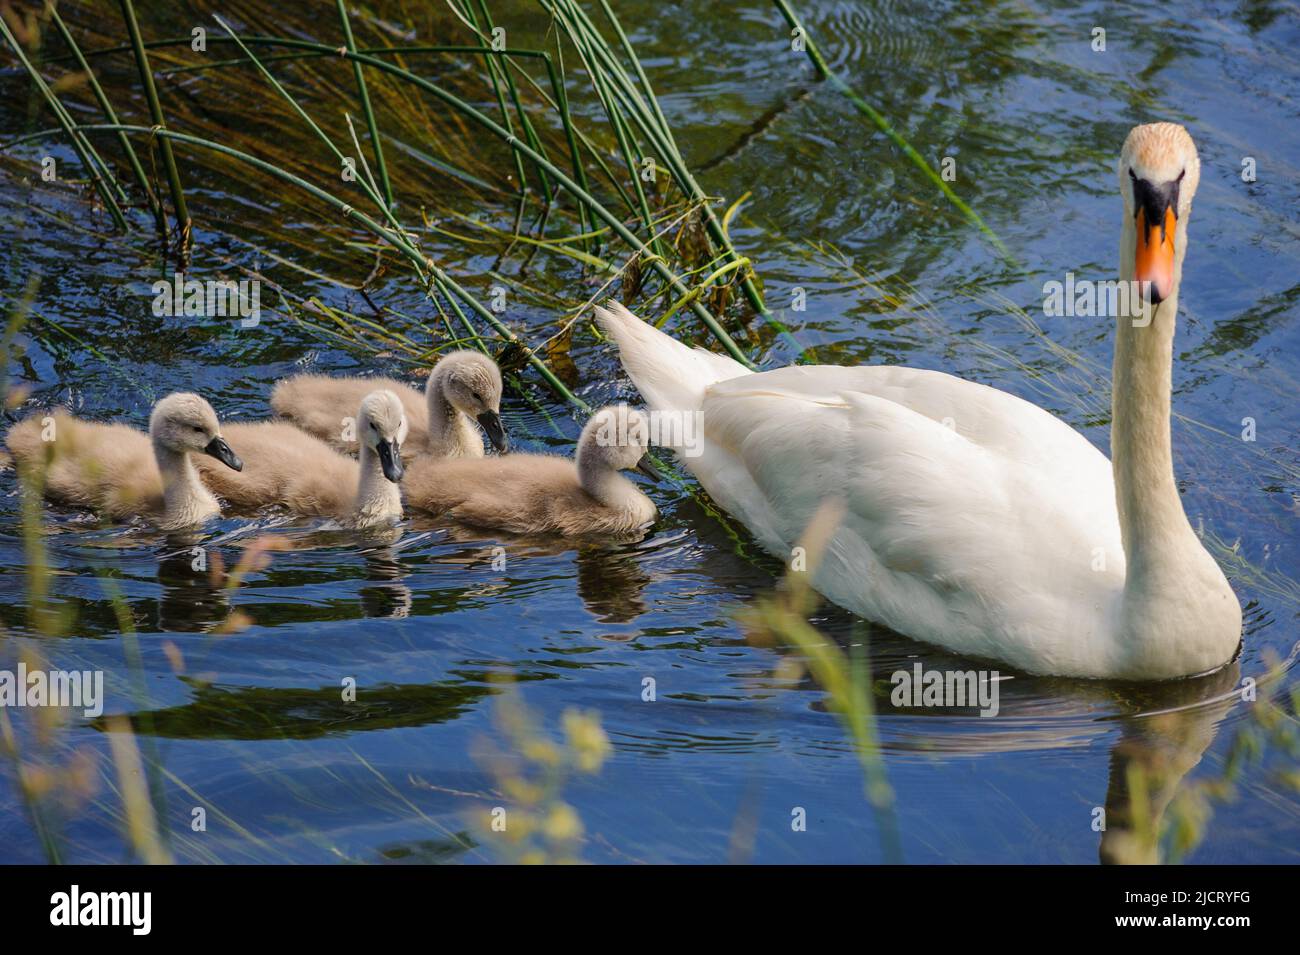 Avon Valley, Fordingbridge, Hampshire, UK, 15th June 2022, Weather. A swan with four signets swims among the reeds in the cool, clear water of the River Avon on a hot summer day. Paul Biggins/Alamy Live News Stock Photo